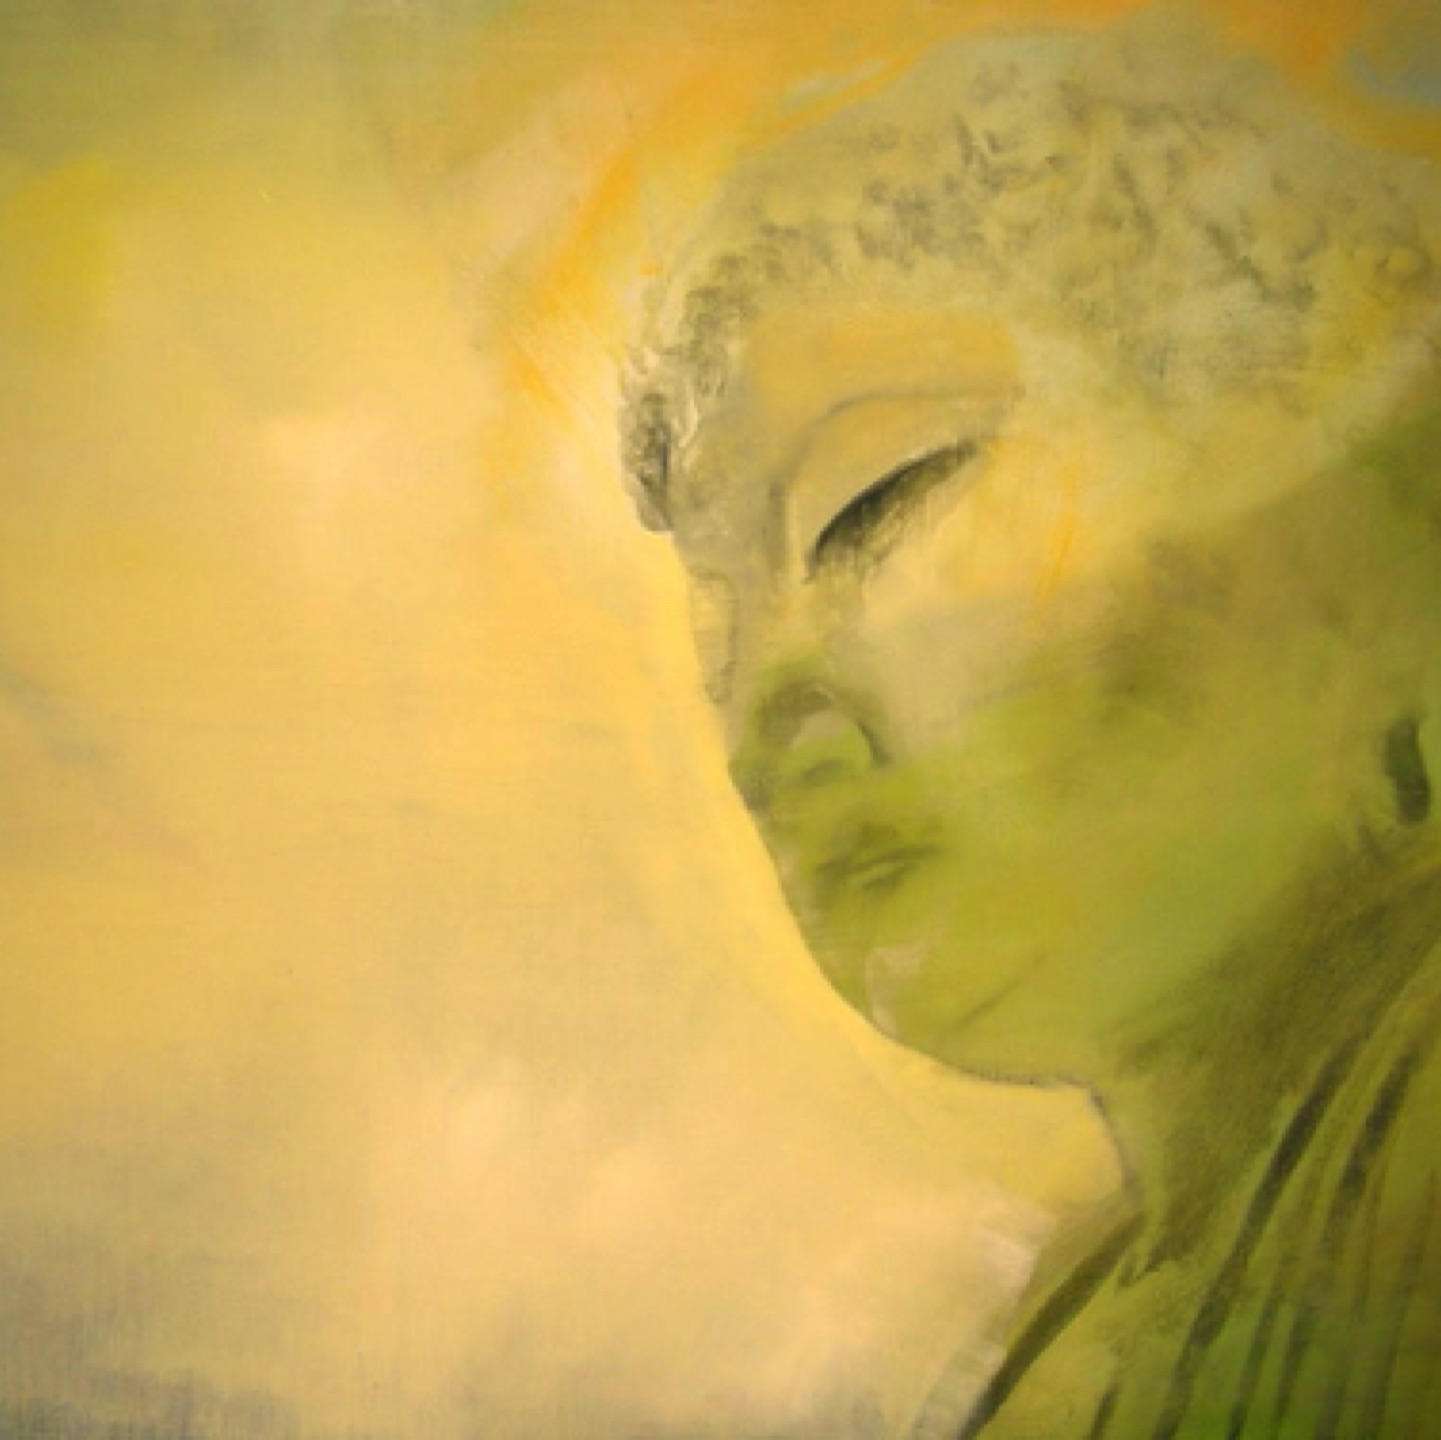 Gregg Chadwick
Buddha of Kamakura
36"x48"oil on linen 2009
Private Collection, Los Angeles